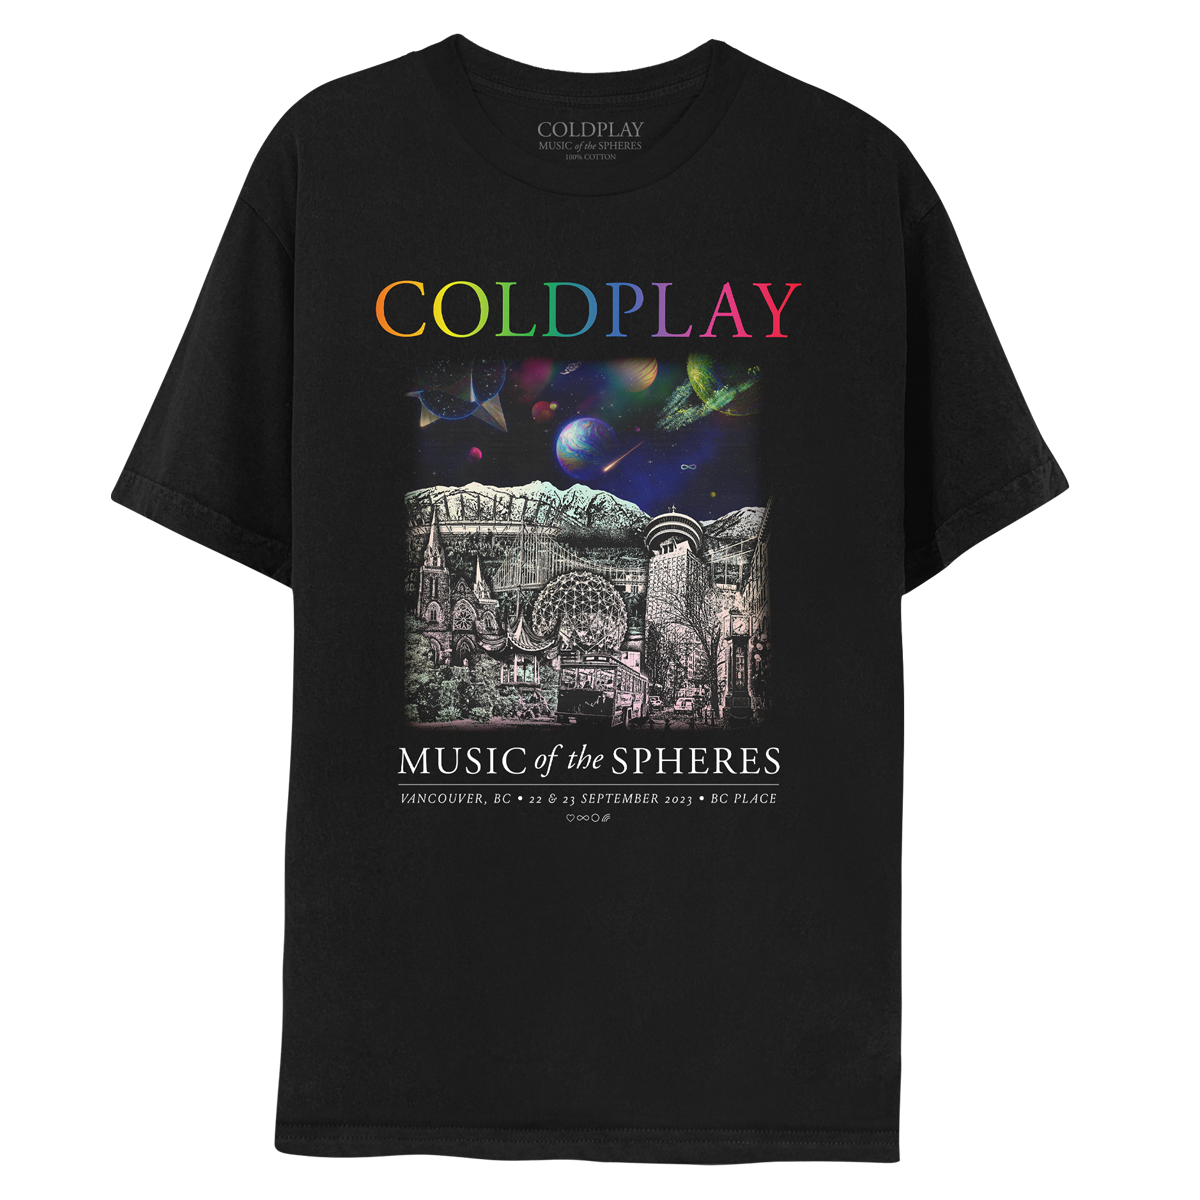 Vancouver Music of the Spheres Limited Edition Tour Tee